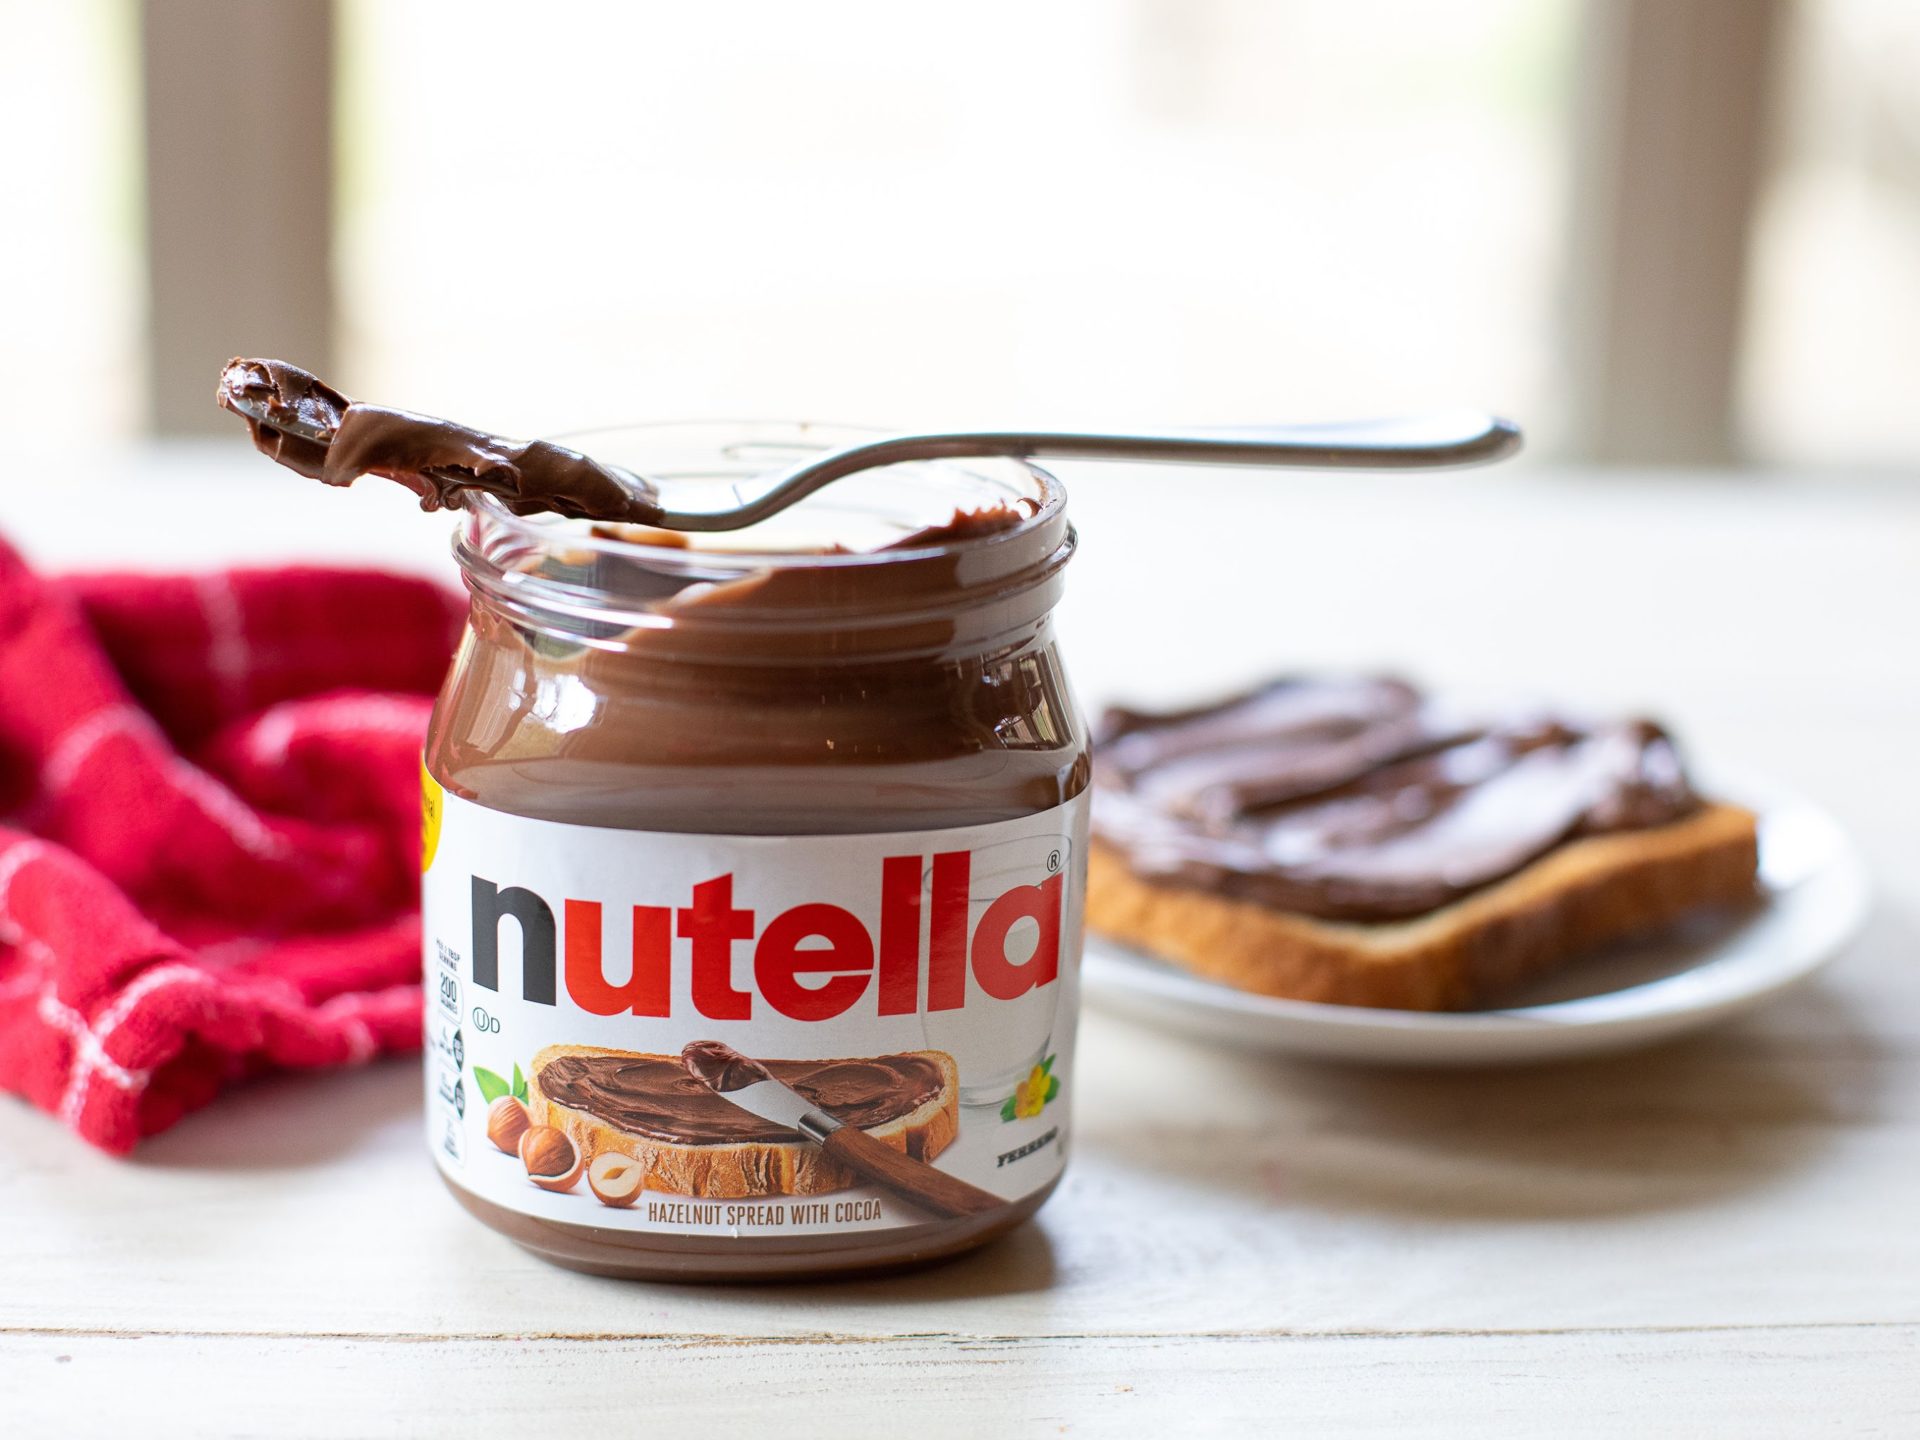 Grab Nutella For As Low As 74¢ At Kroger